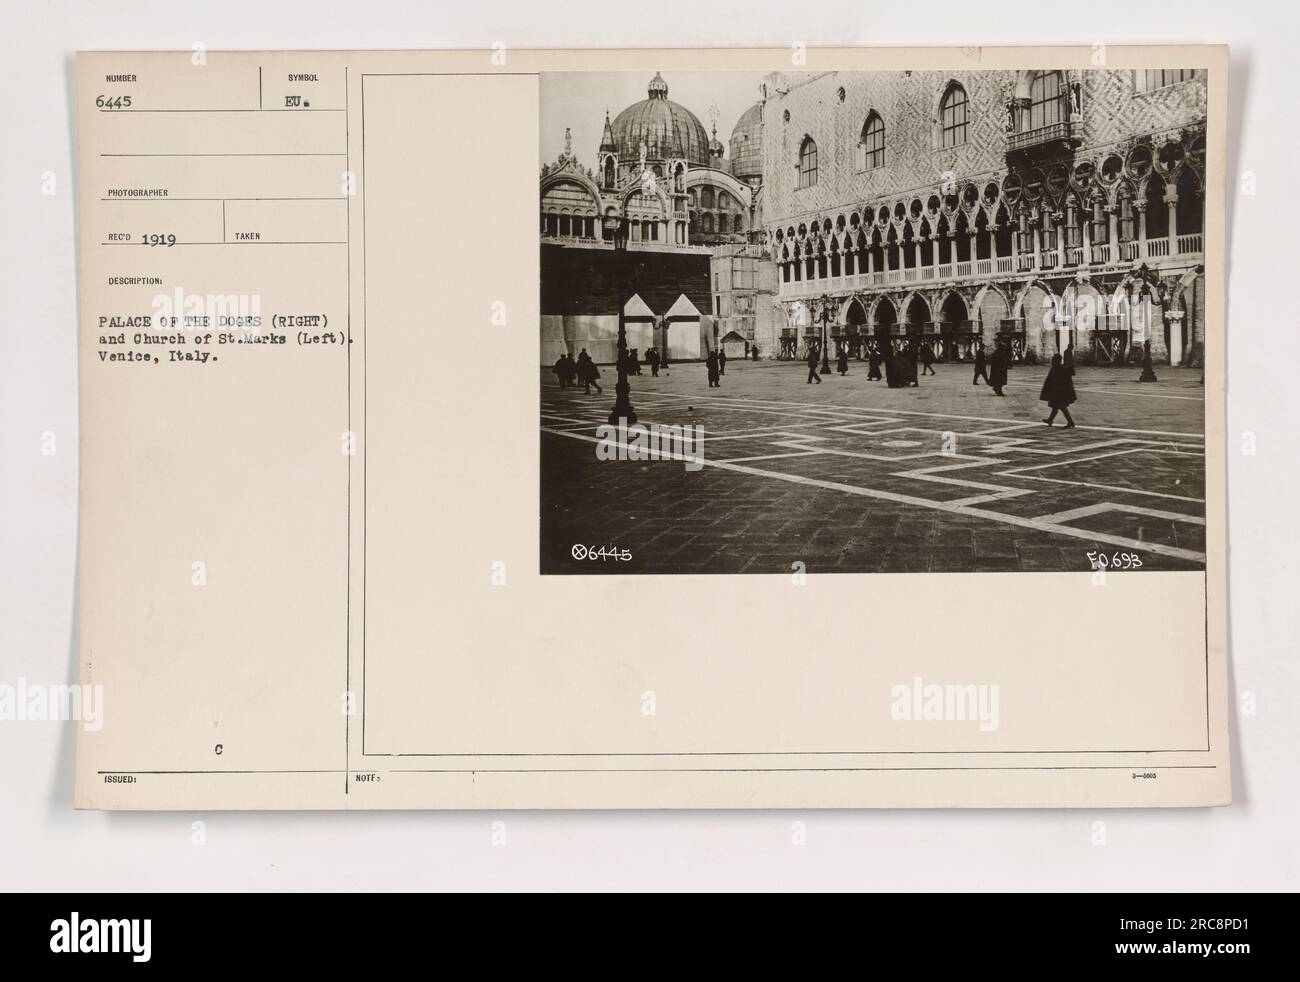 111-SC-6445: A photo taken in Venice, Italy, showing the Palace of Doges on the right and the Church of St. Marks on the left in Piazza San Marco. The photograph was taken in 1919 by a photographer with the initials 'ET.' The symbol 'KU' is also present. The photo is labeled as number 6445 and has the description 'Palace of the Doges and Church of St. Marks in Venice, Italy.' The print also has the number HOTE 06445 and the code F.0.693. Stock Photo